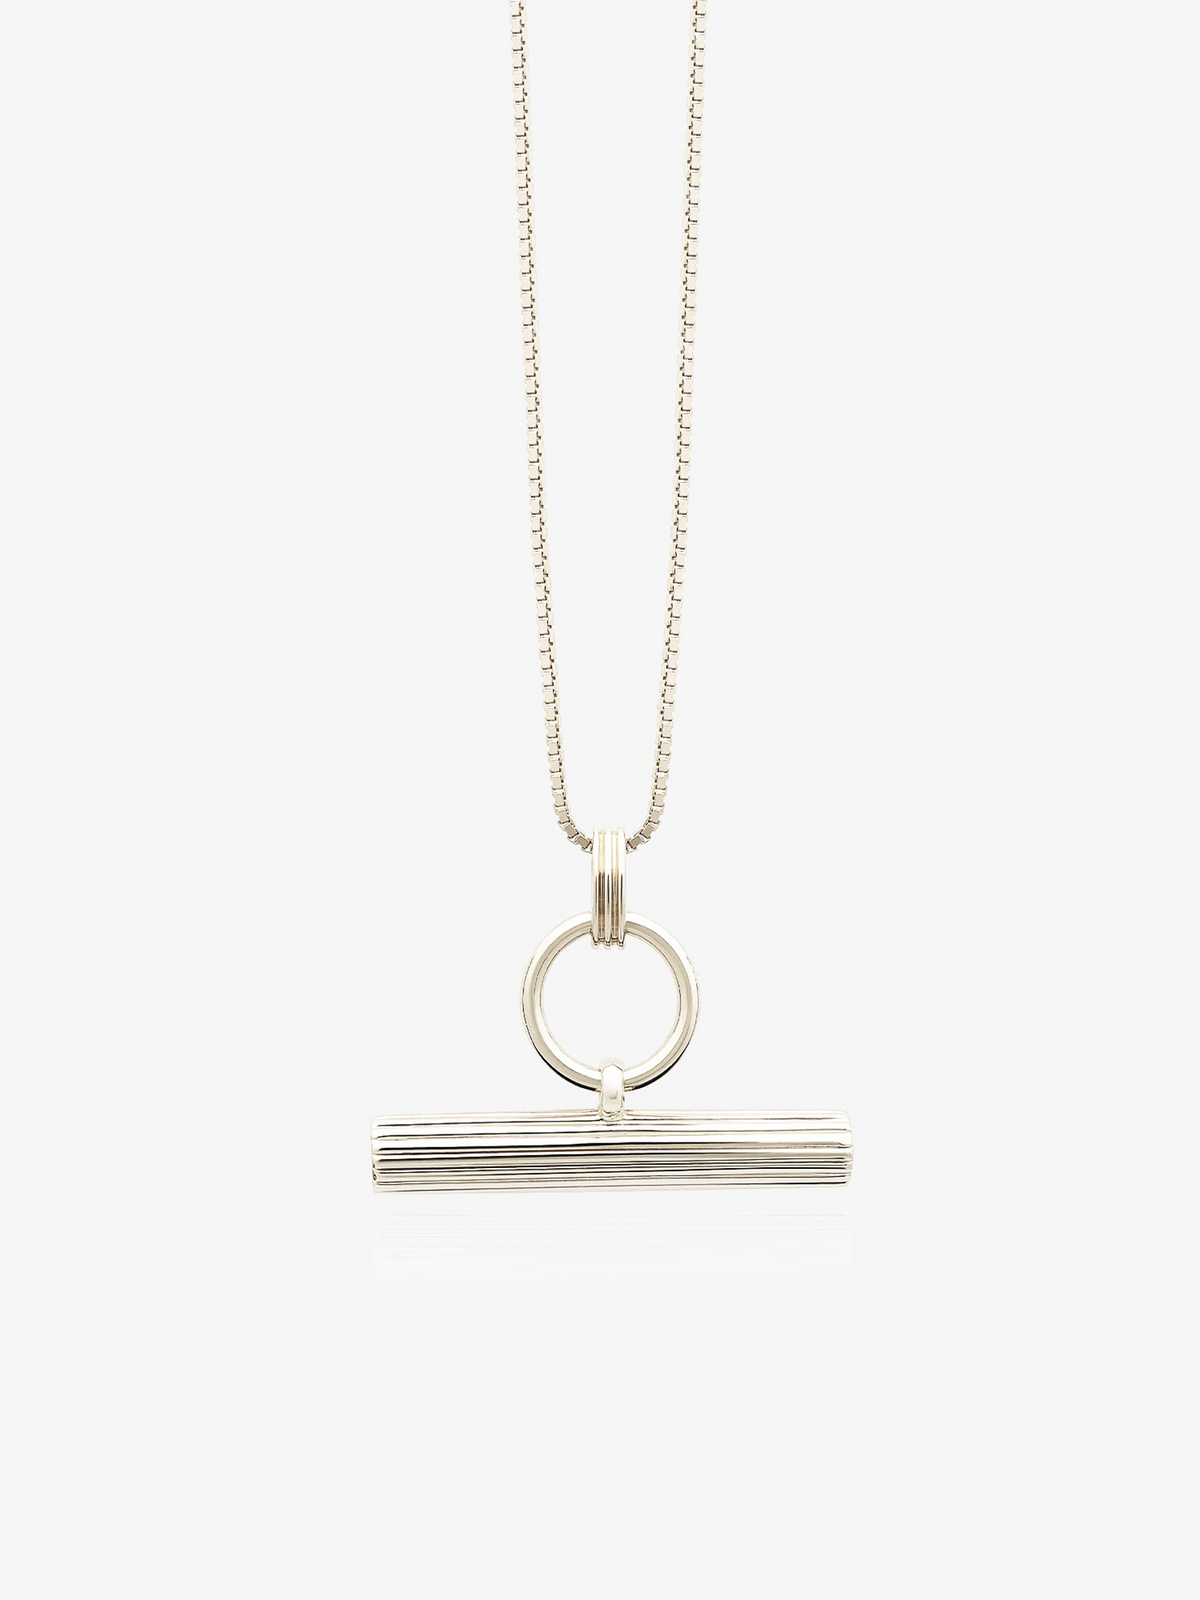 Personalised T-Bar Necklace